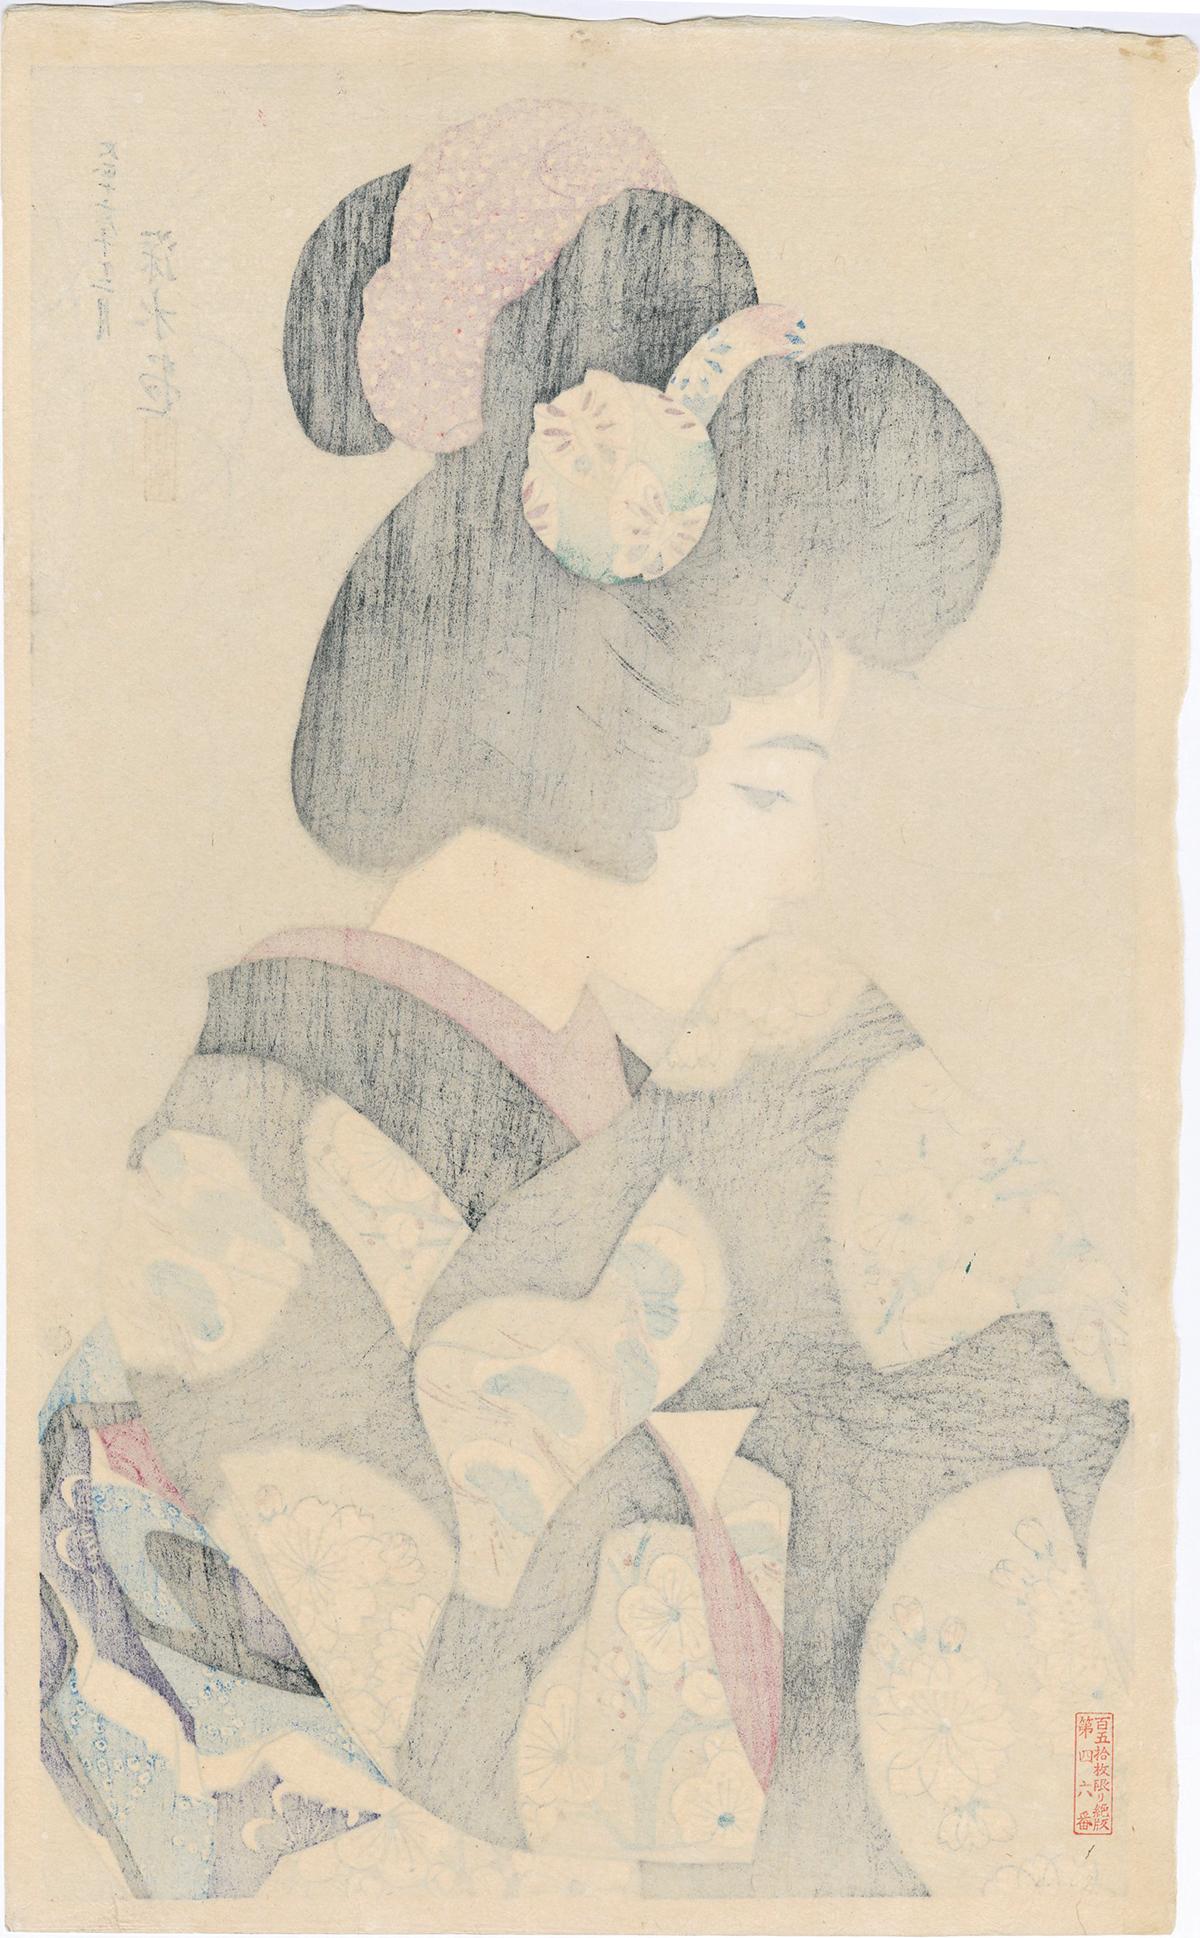 Contemplating the Coming Spring (Young Maiko, Apprentice Geisha) - Showa Print by Ito Shinsui